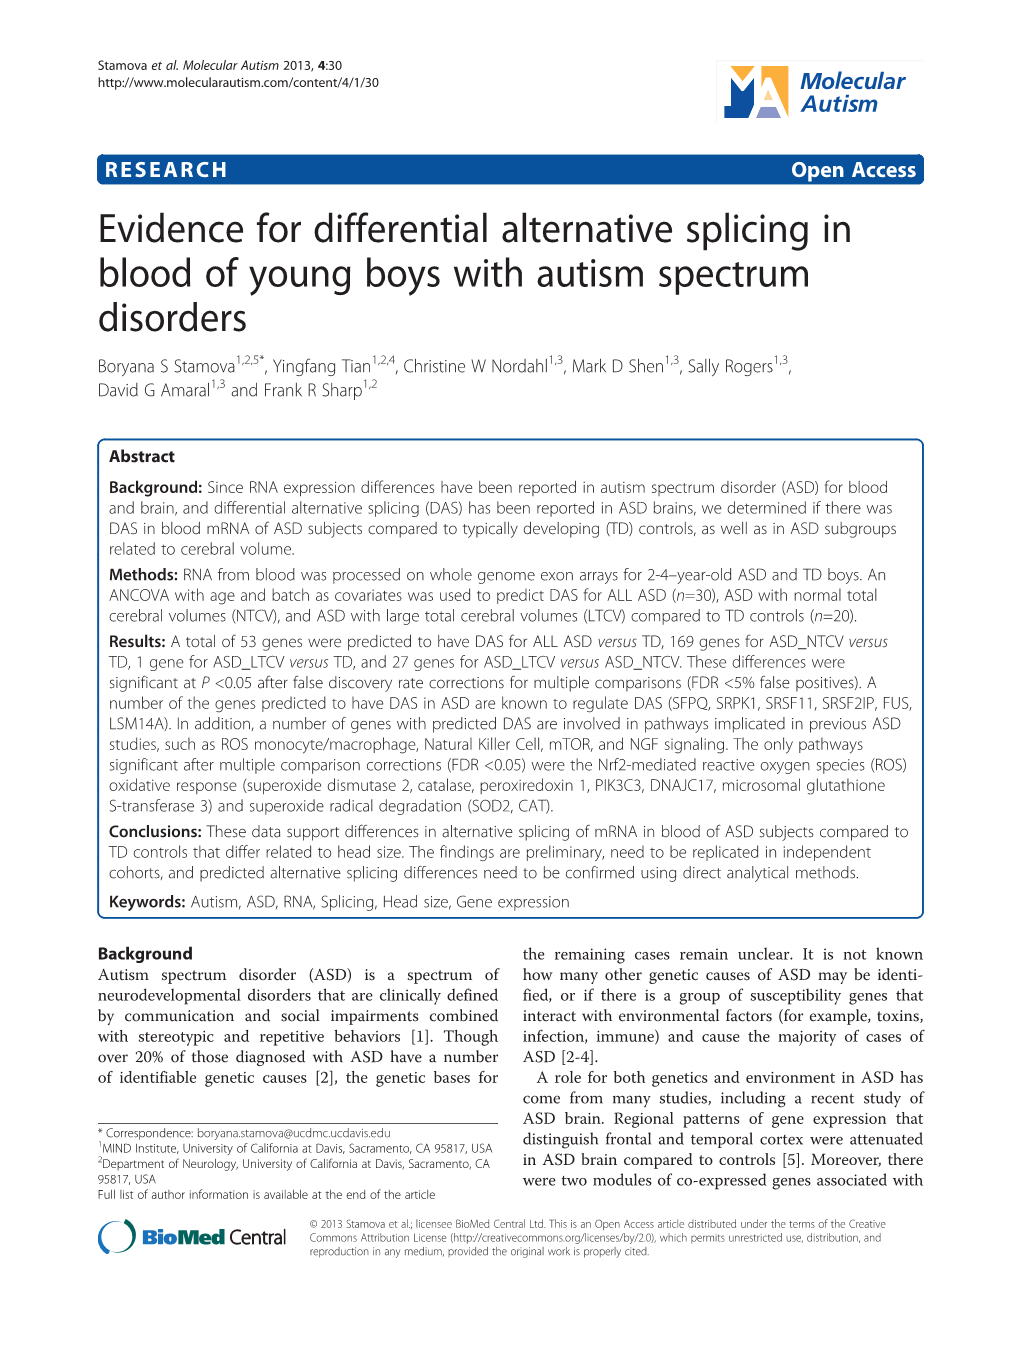 Evidence for Differential Alternative Splicing in Blood of Young Boys With